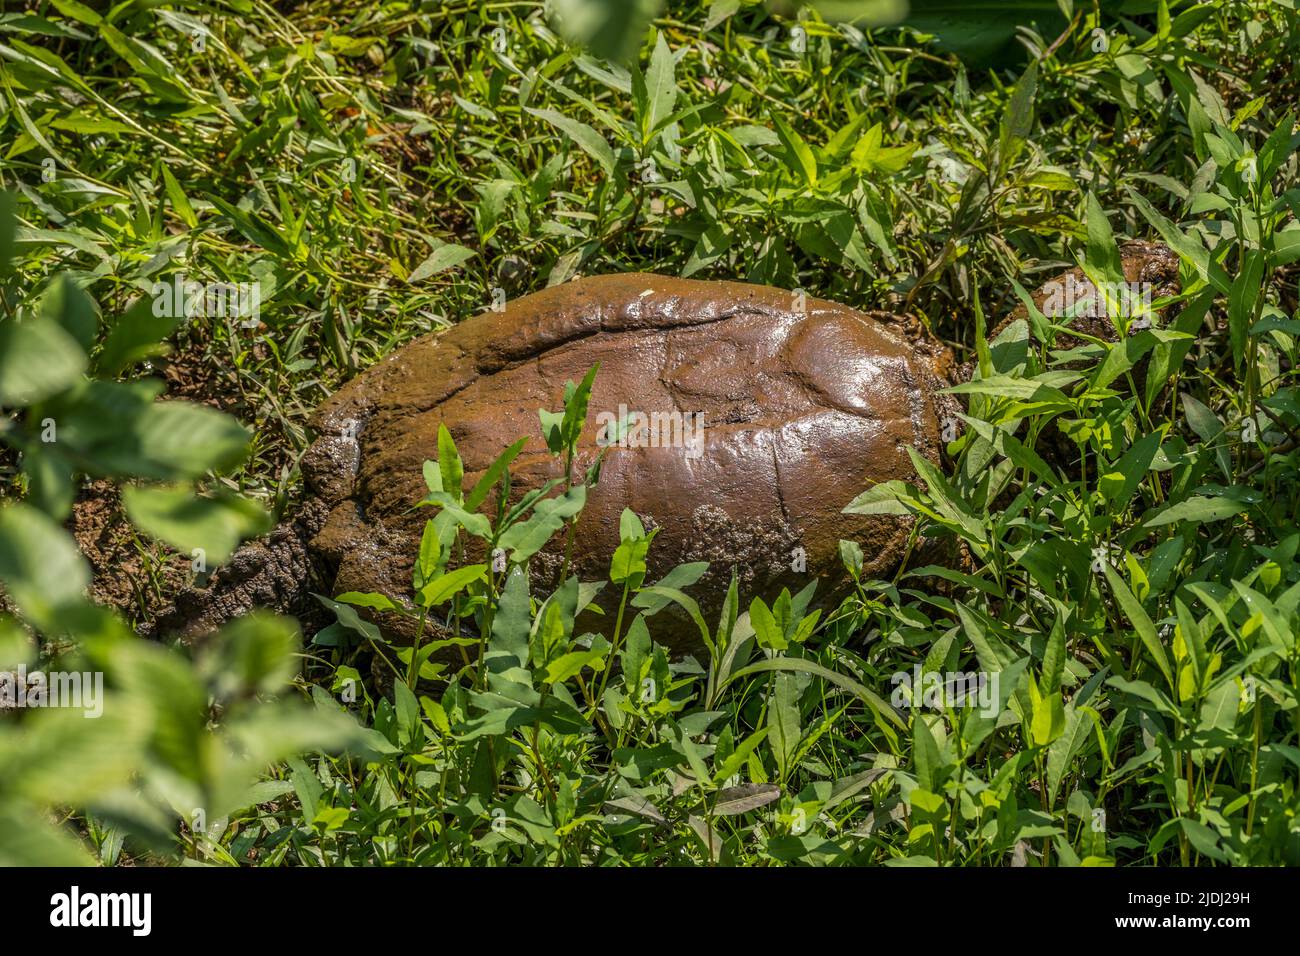 A prehistoric looking large snapping turtle walking out of the water into the aquatic vegetation on the muddy wet ground on a sunny day at the wetland Stock Photo